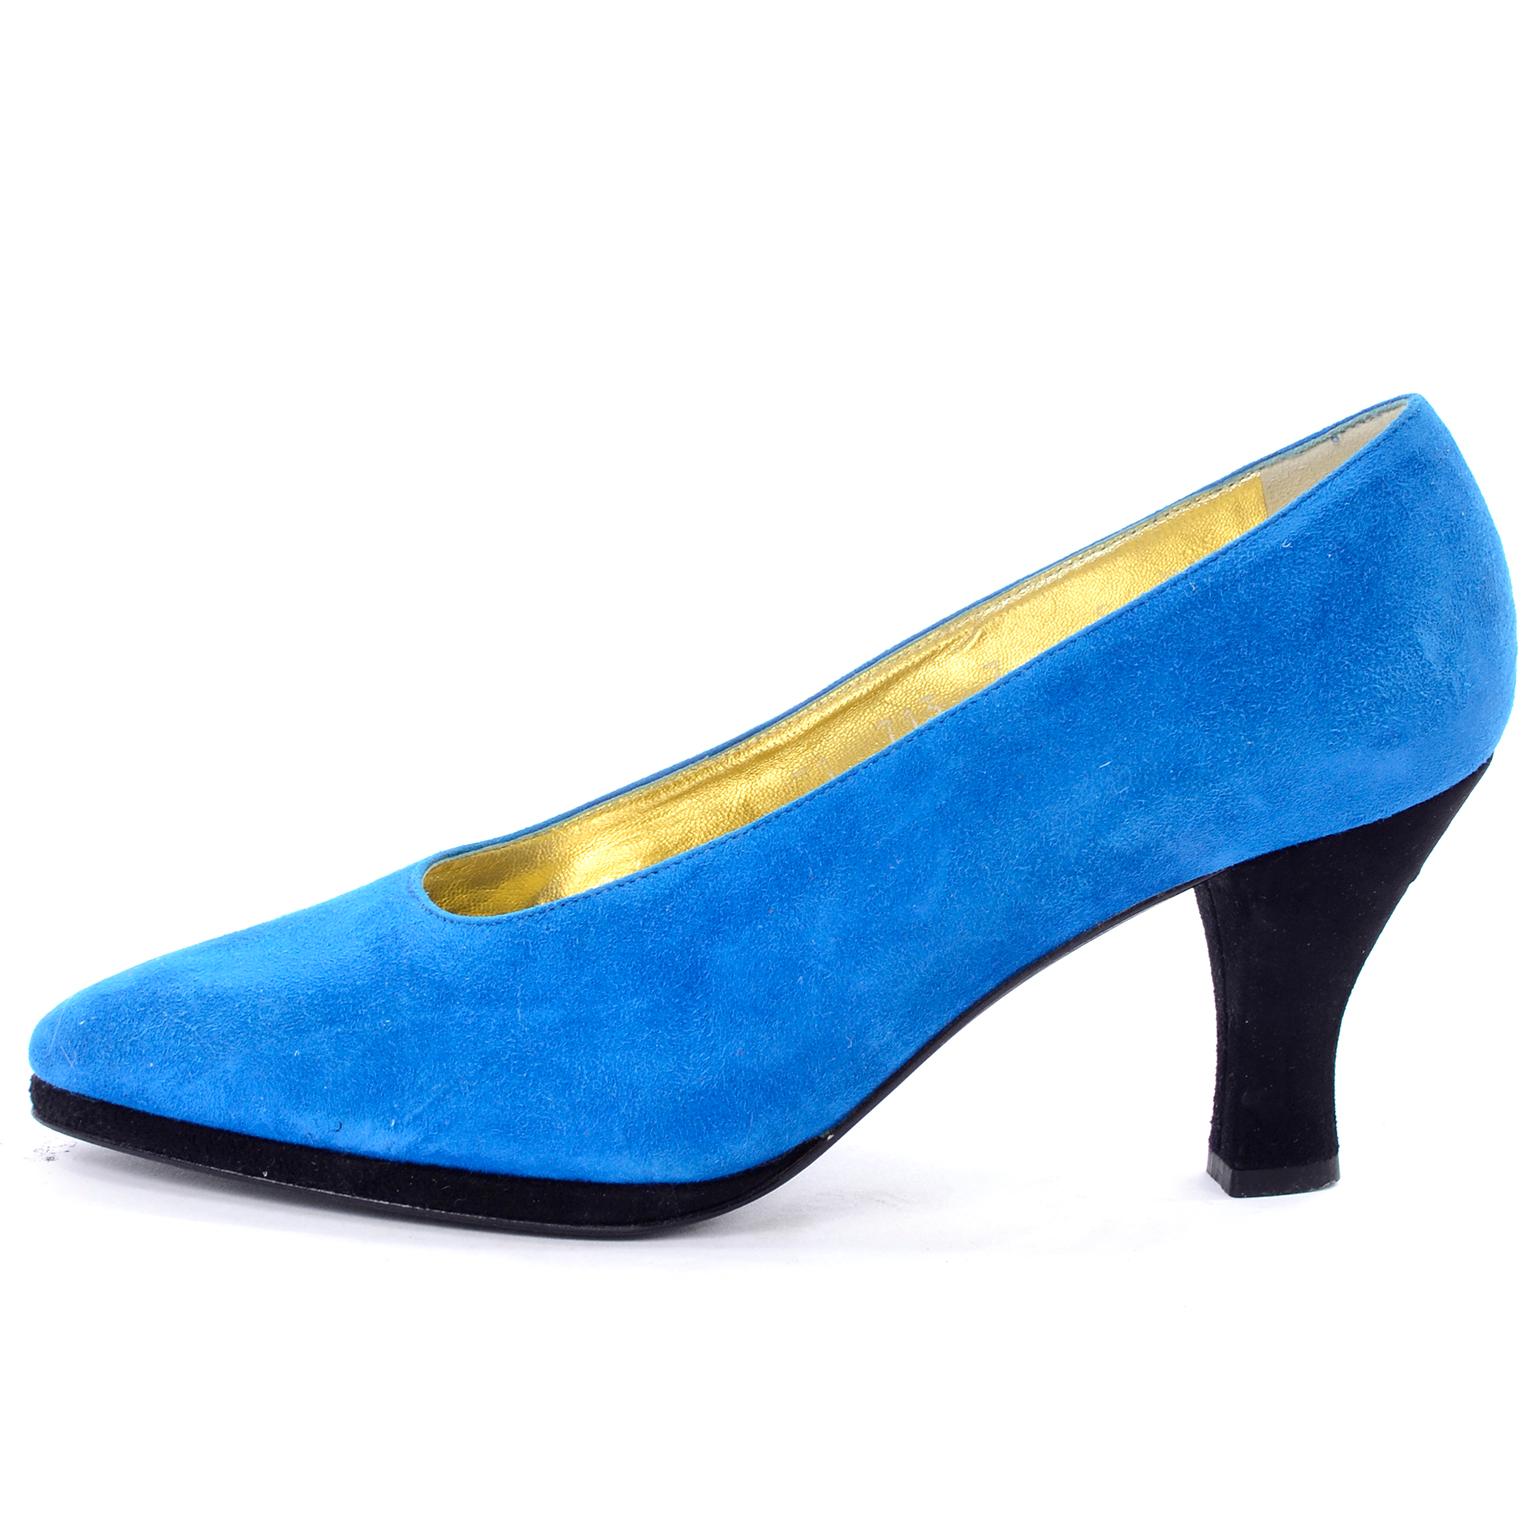 Vintage Unworn New Escada Blue Suede Shoes WIth Black Heels Size 7B In New Condition For Sale In Portland, OR